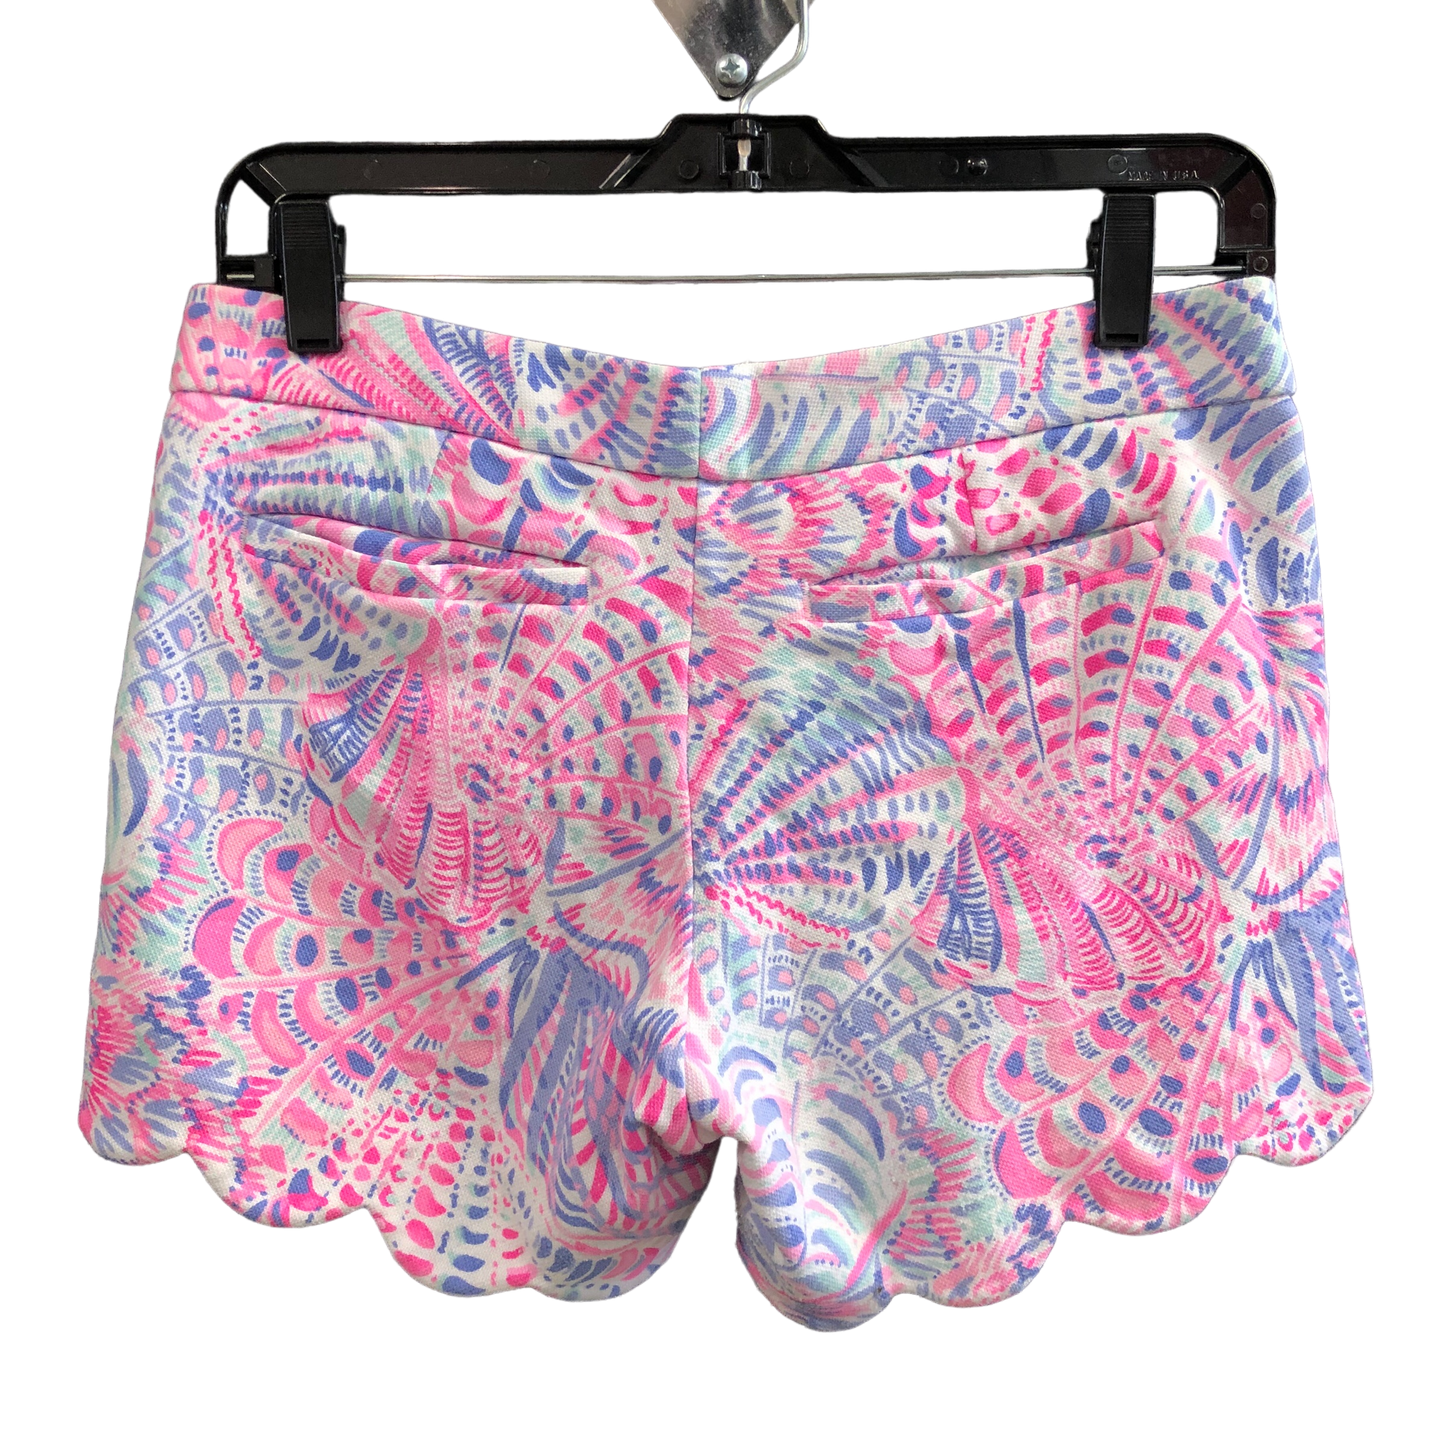 Blue & Pink Shorts Designer Lilly Pulitzer, Size S